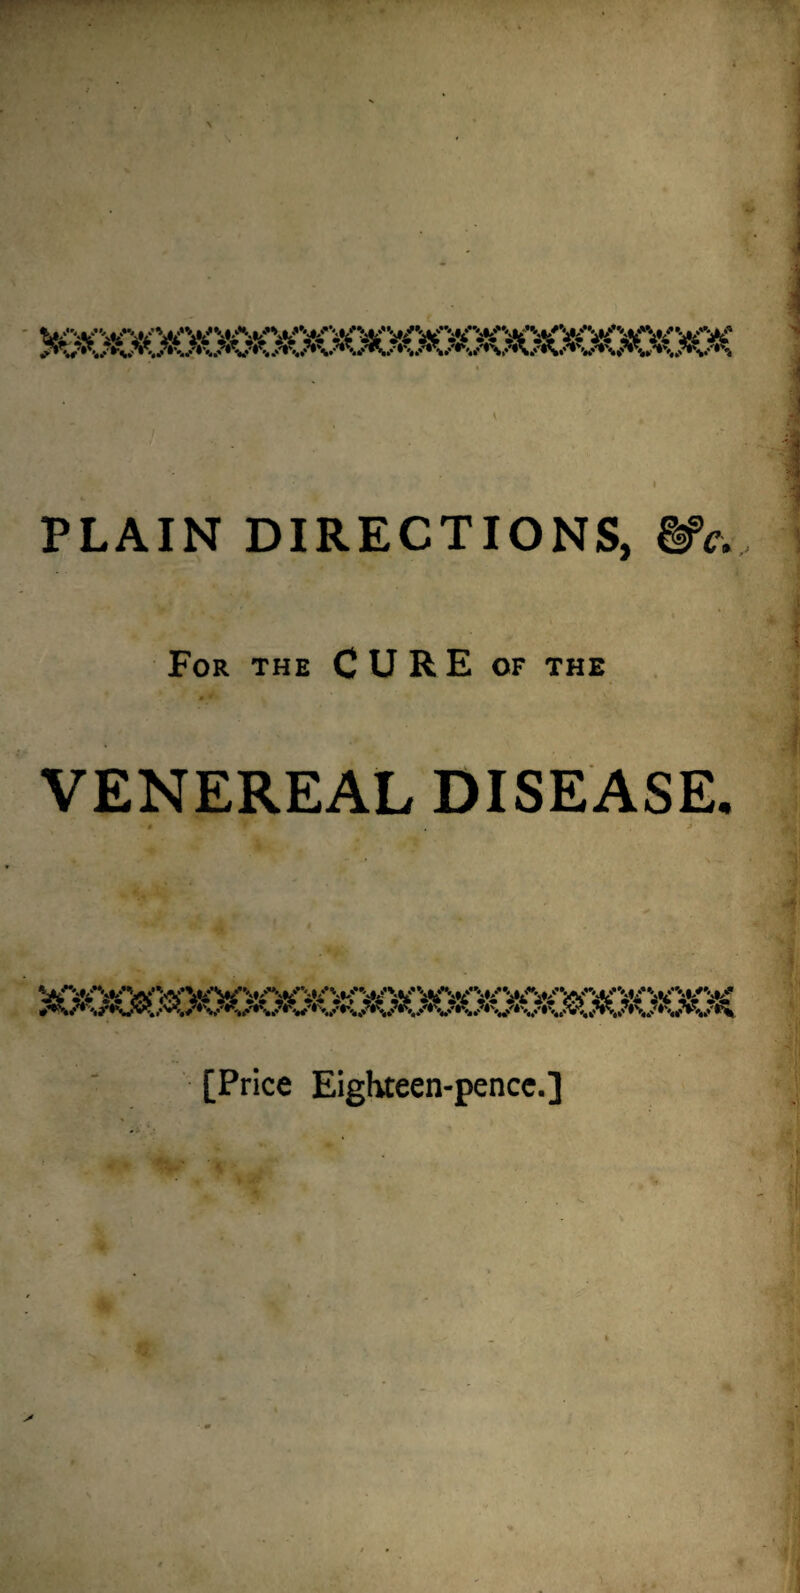 For the CURE of the # * VENEREAL DISEASE. • fl . *■ [Price Eighteen-pence.]